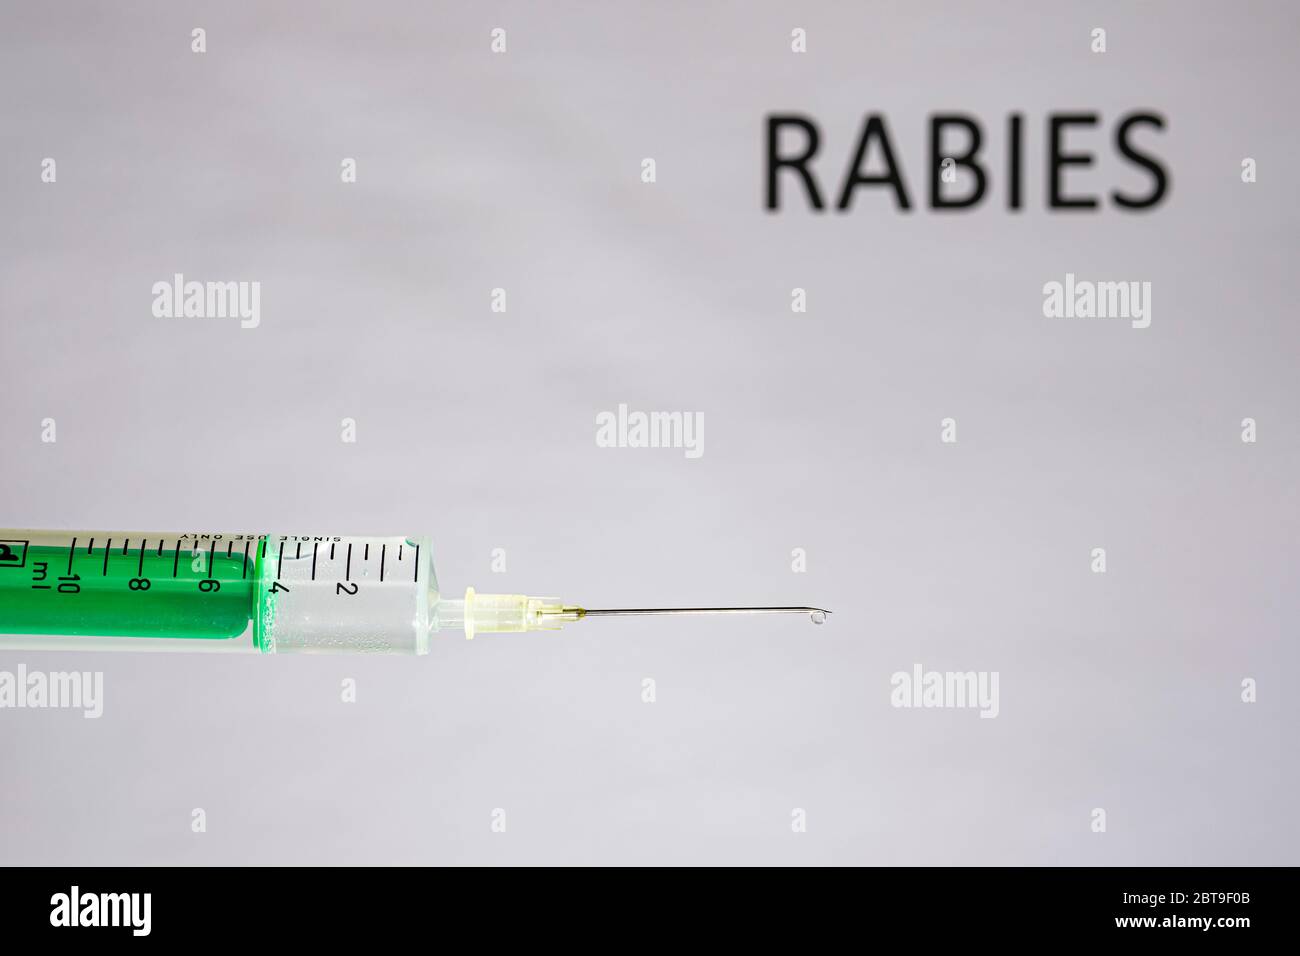 This photo illustration shows a disposable syringe with hypodermic needle, RABIES written on a white board behind Stock Photo